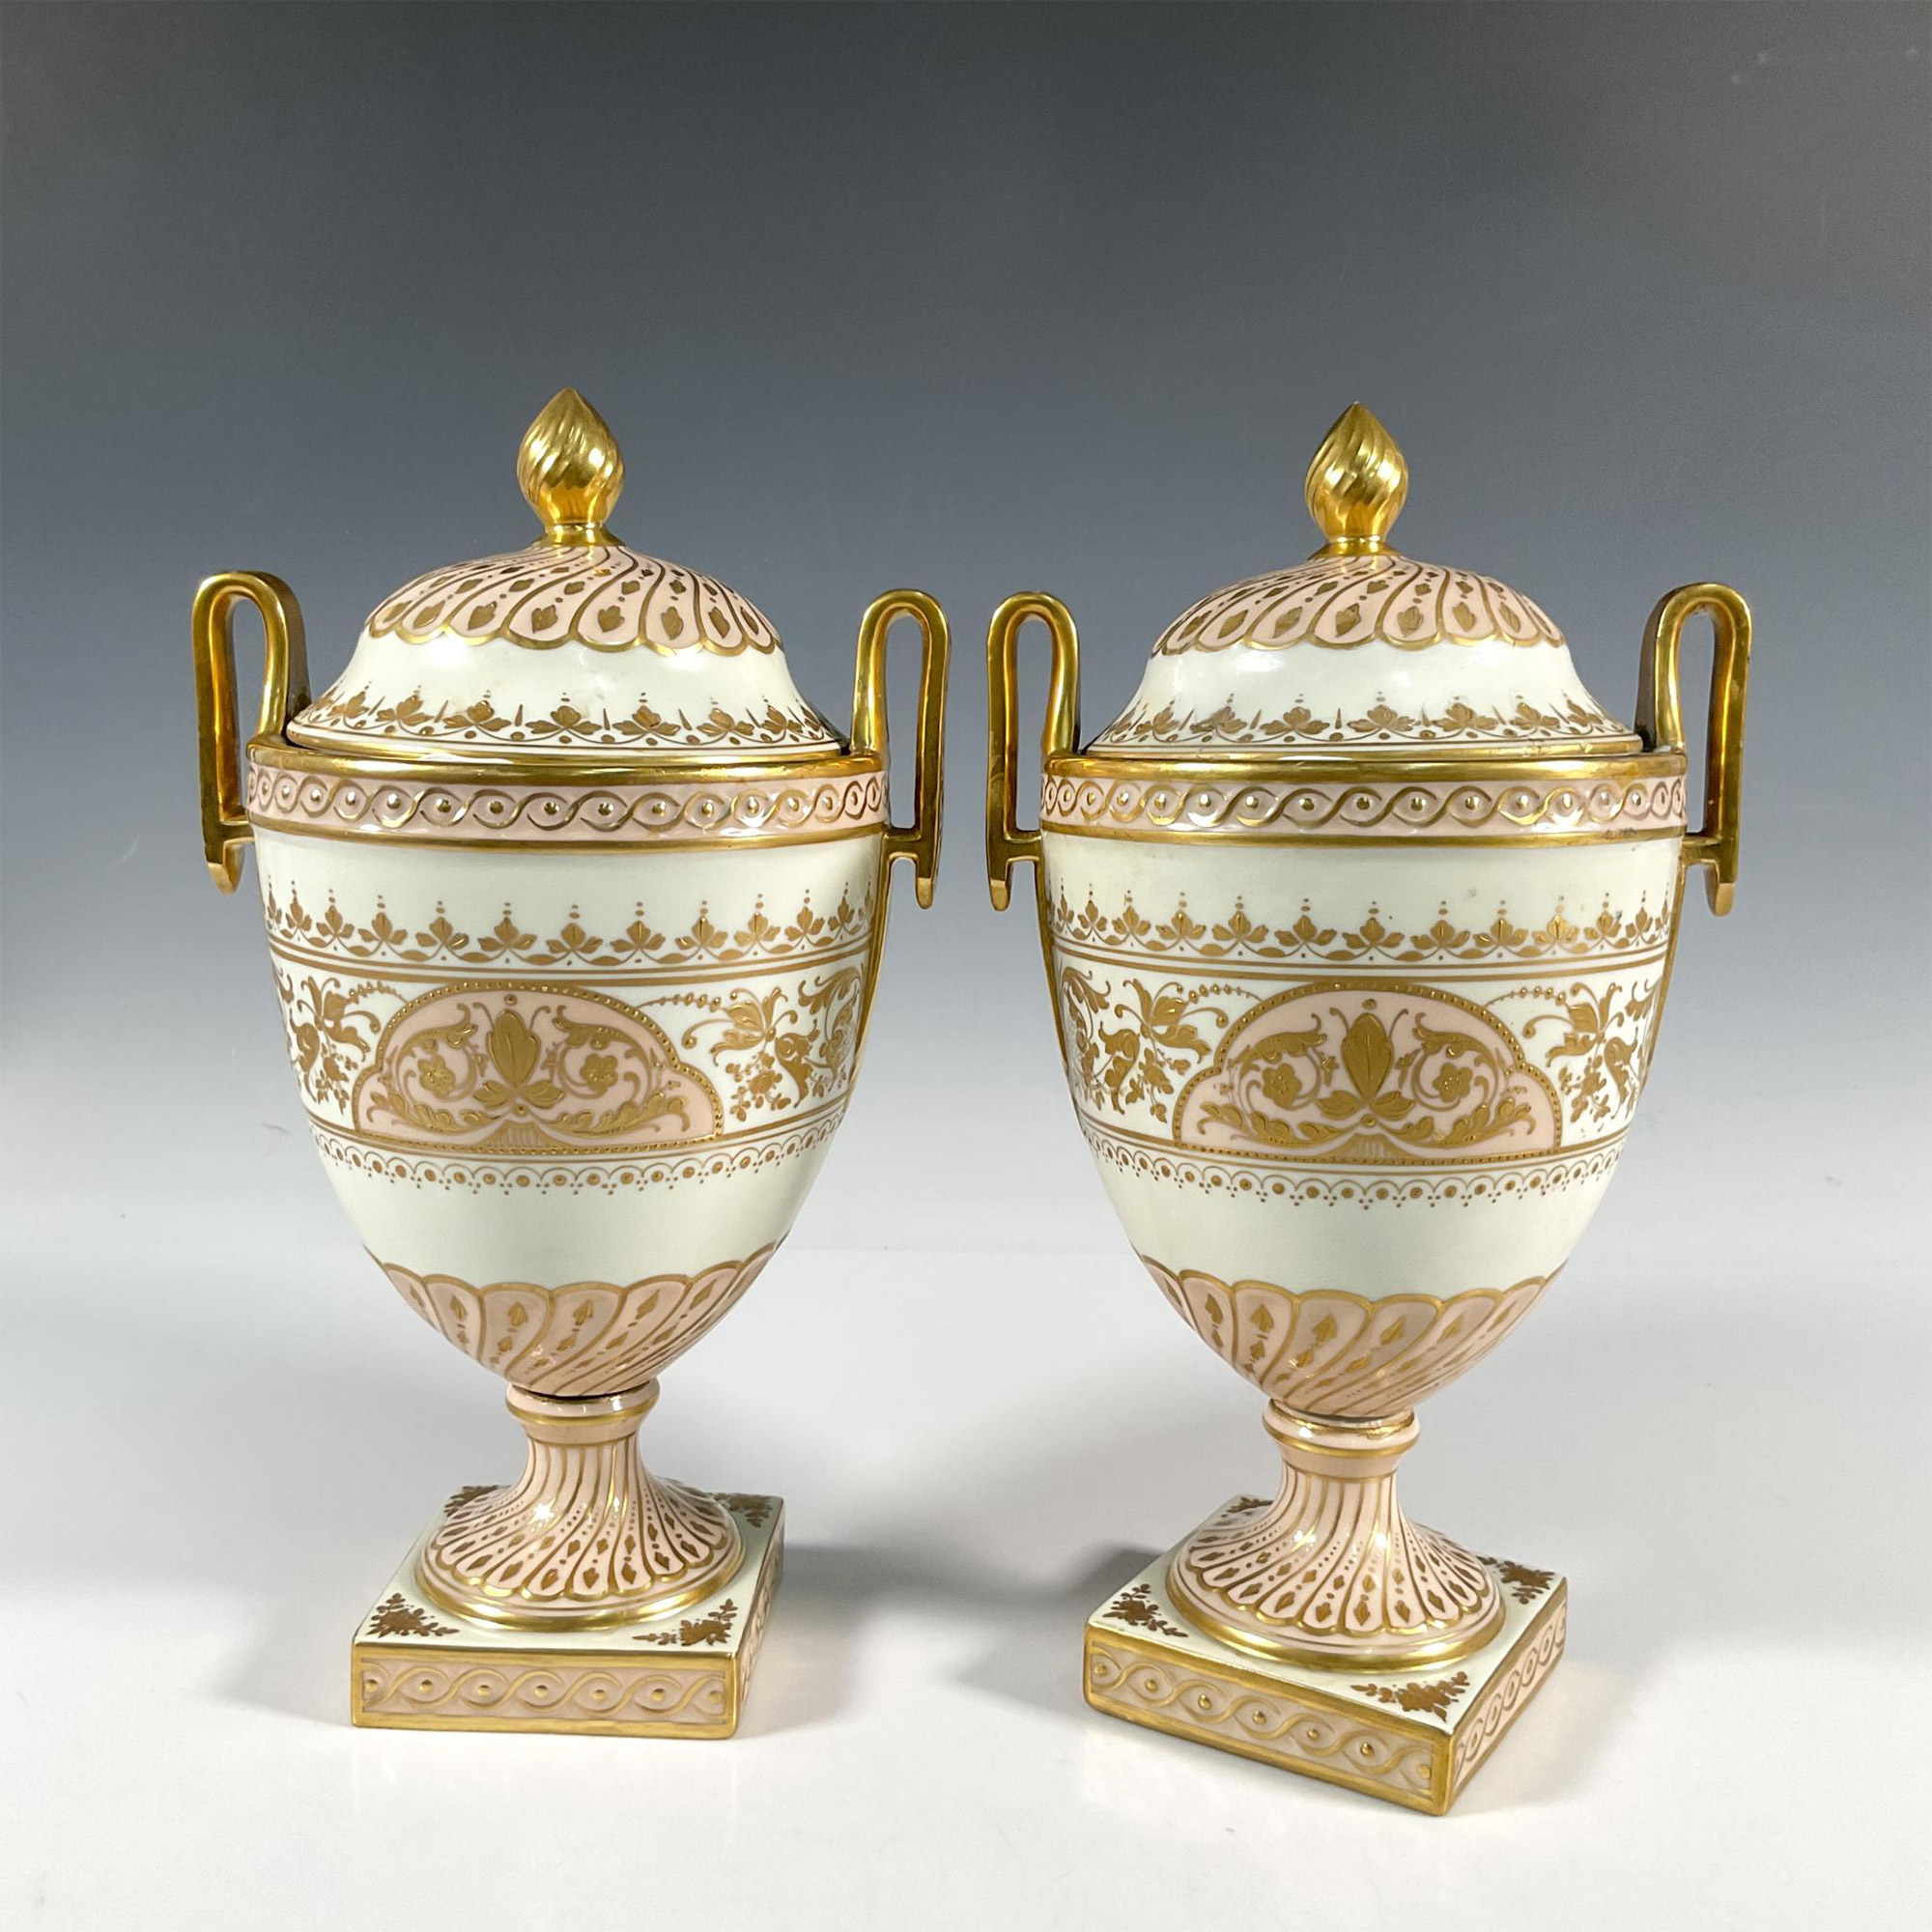 Pair of Dresden Porcelain Vases with Lids - Image 2 of 4